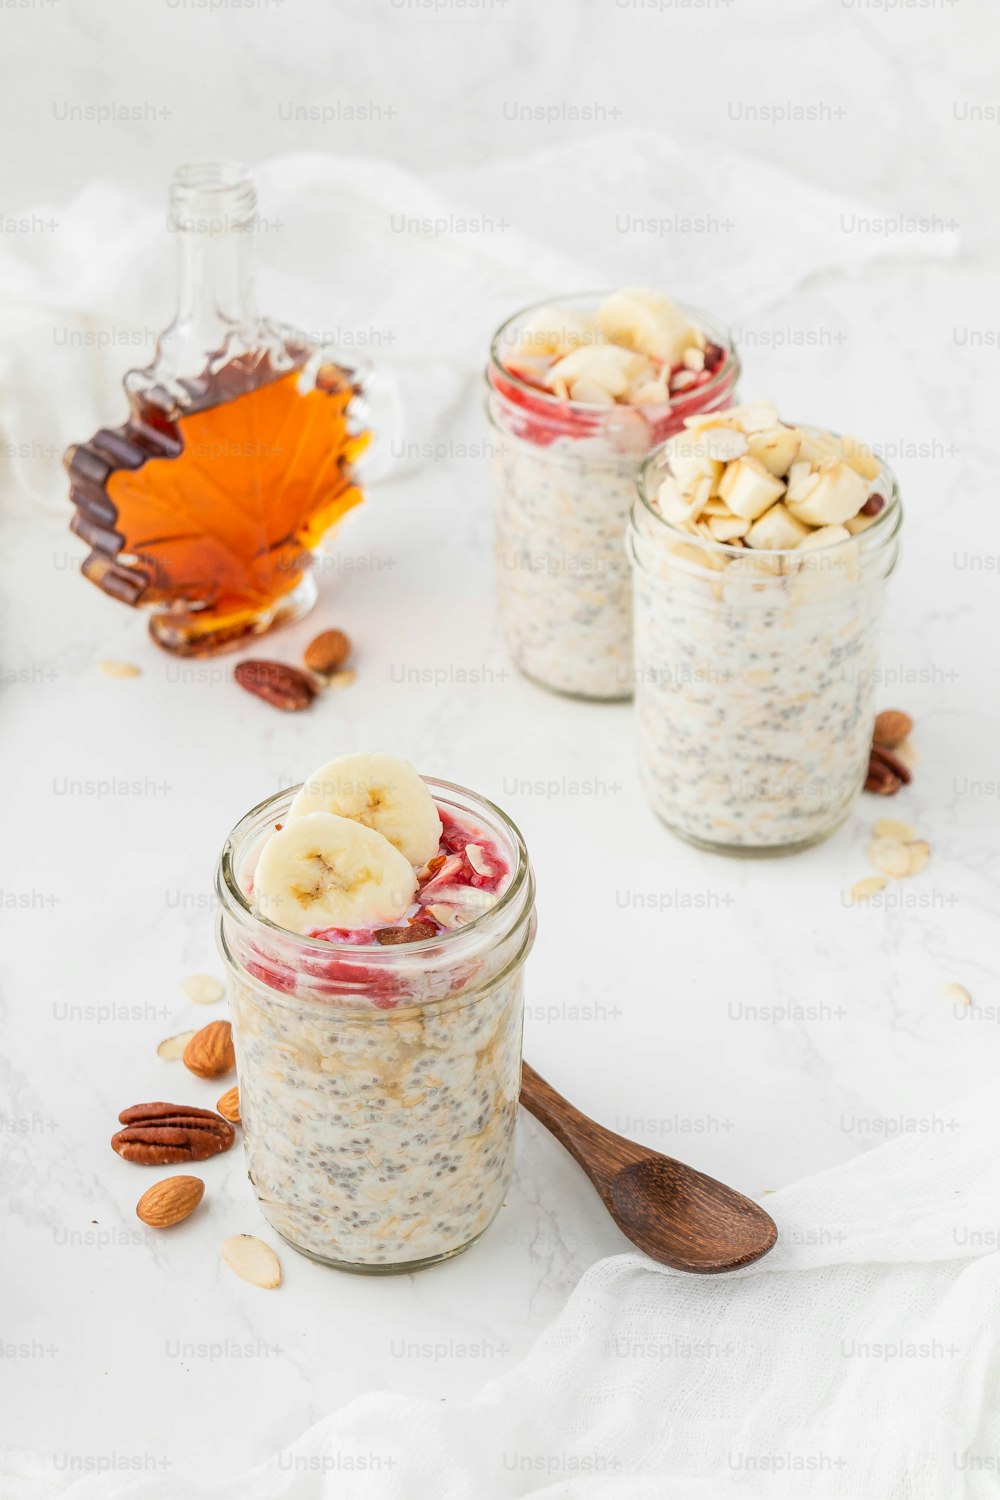 a couple of jars filled with oatmeal and bananas